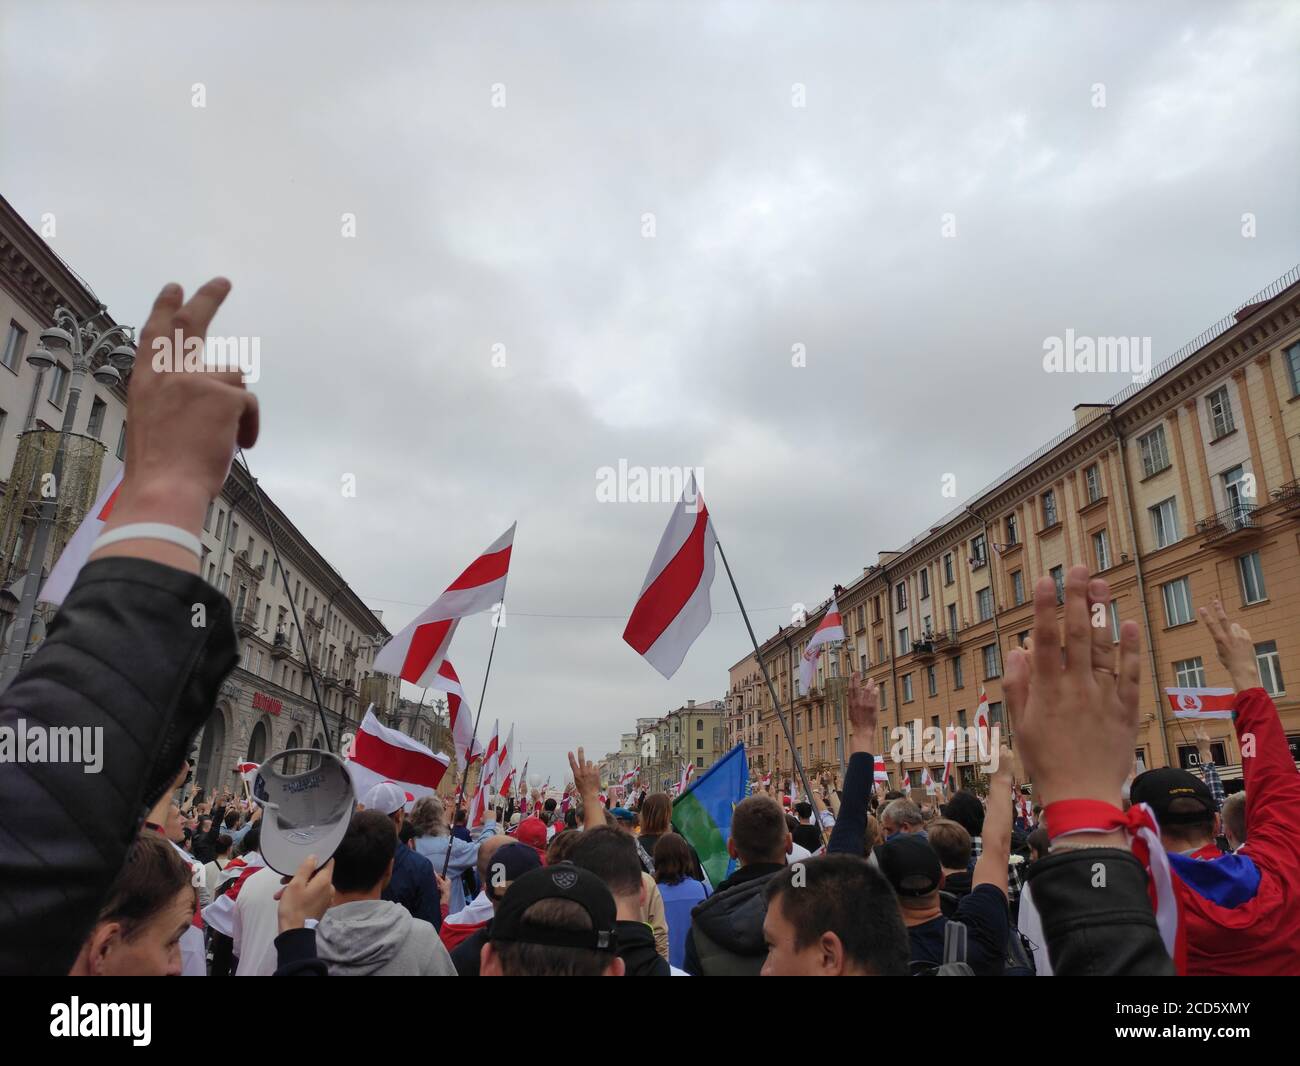 Minsk / Belarus - August 23 2020: Protesters with white-red-white flags raising hand in the victory sign while marching  through the city center Stock Photo